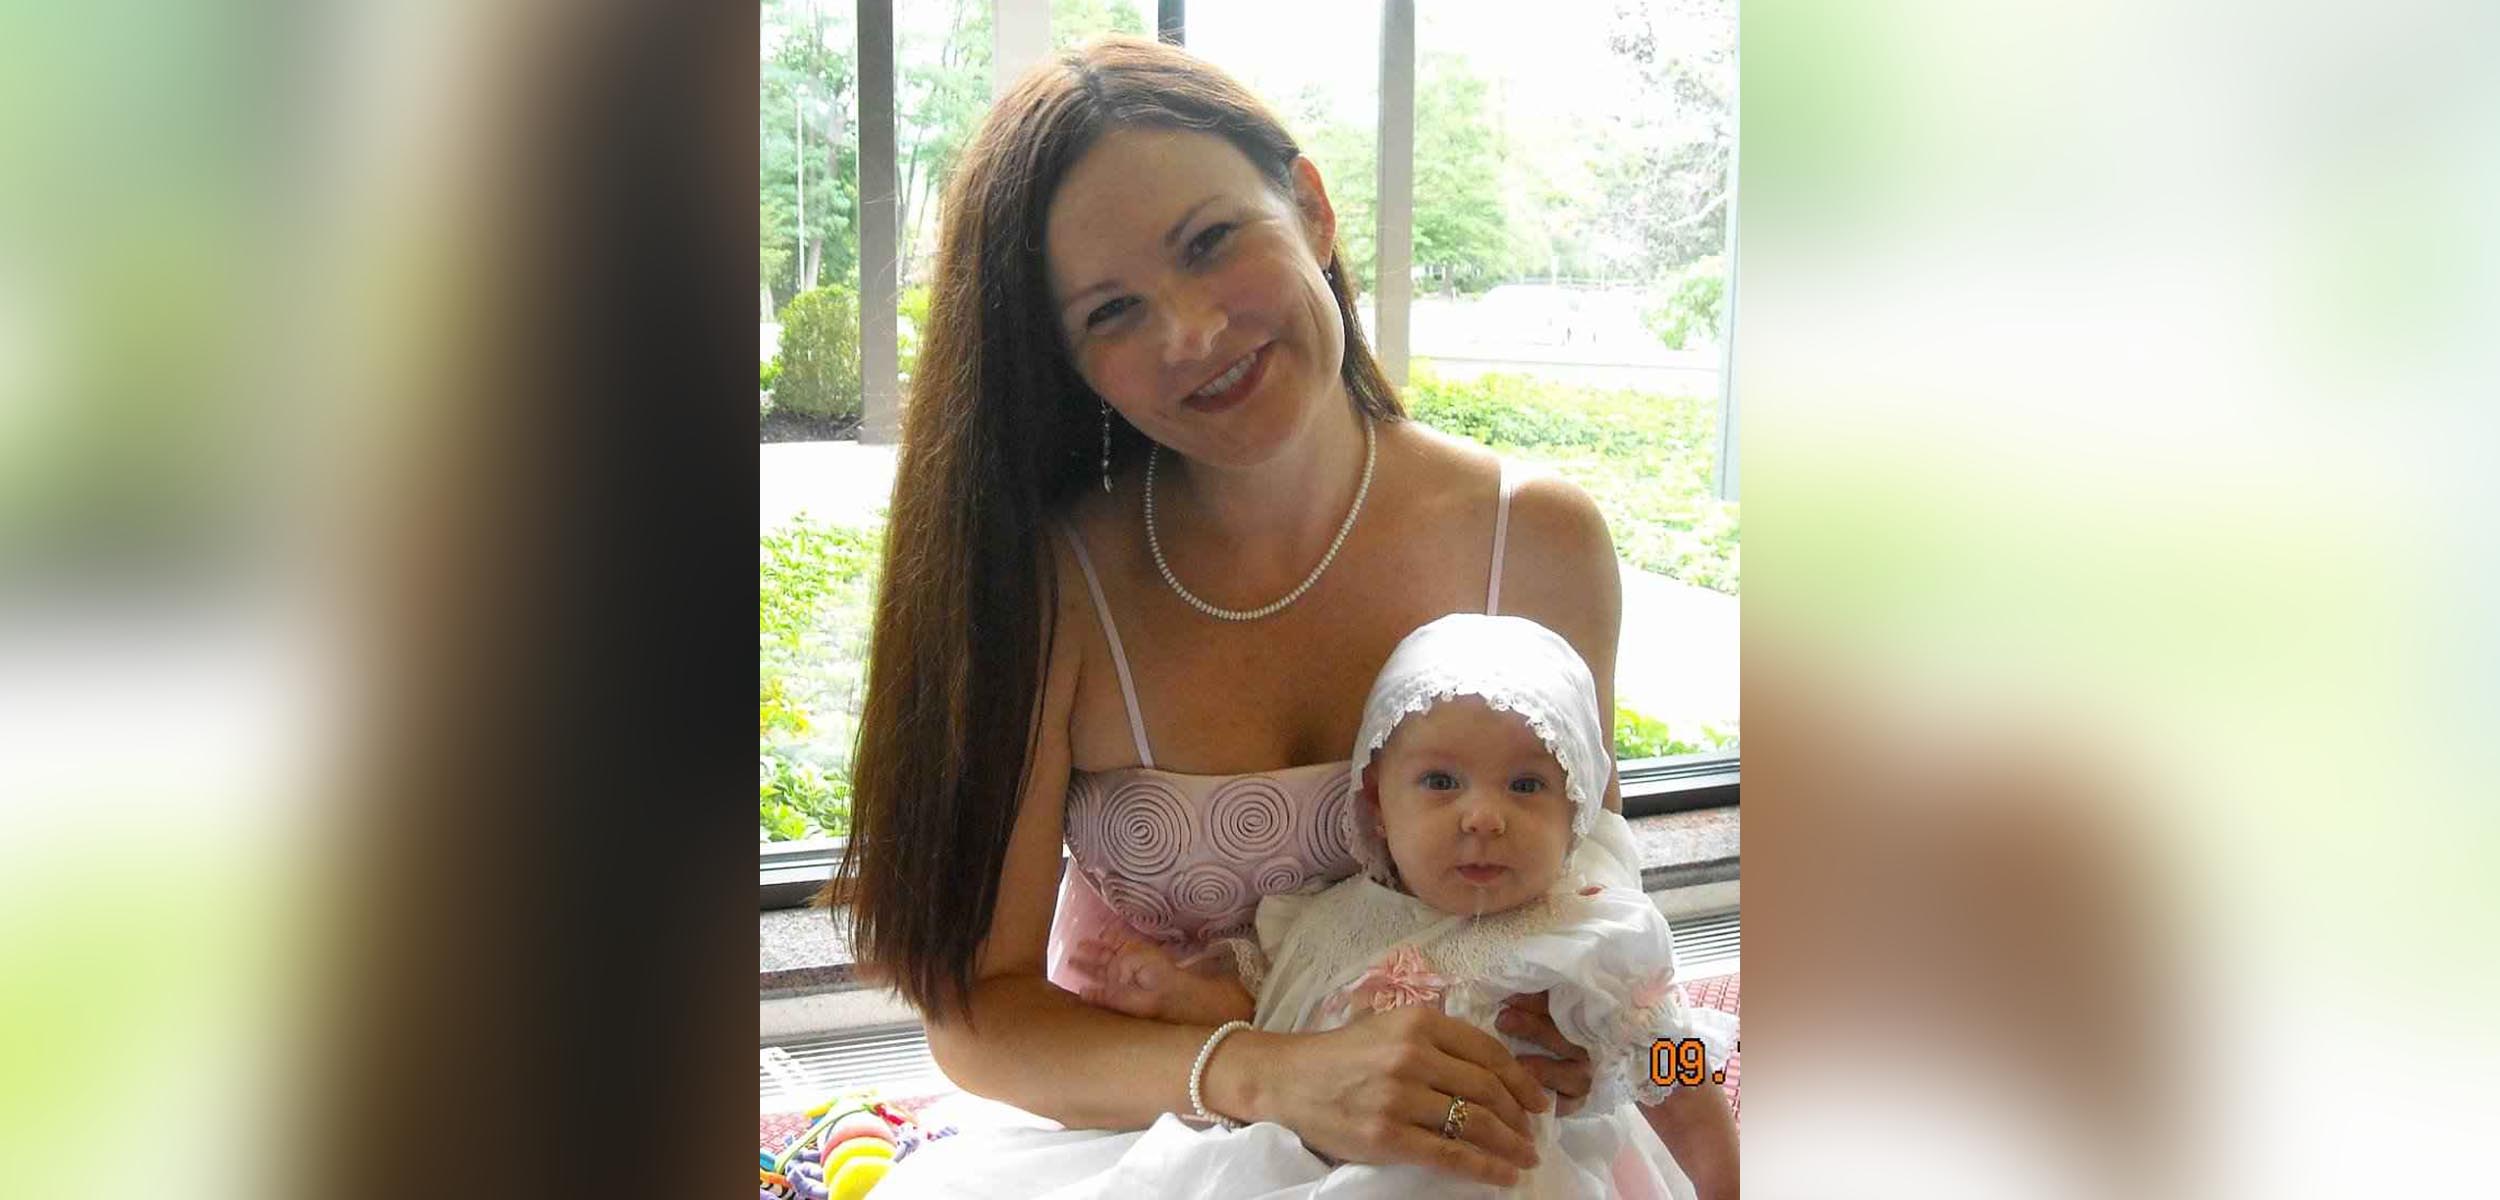 PHOTO: Kristie Reeves-Cavaliero, shown holding her baby, Sophia Rayne "Ray Ray" Cavaliero, has been raising awareness to help prevent the number of hot car-related deaths in children.